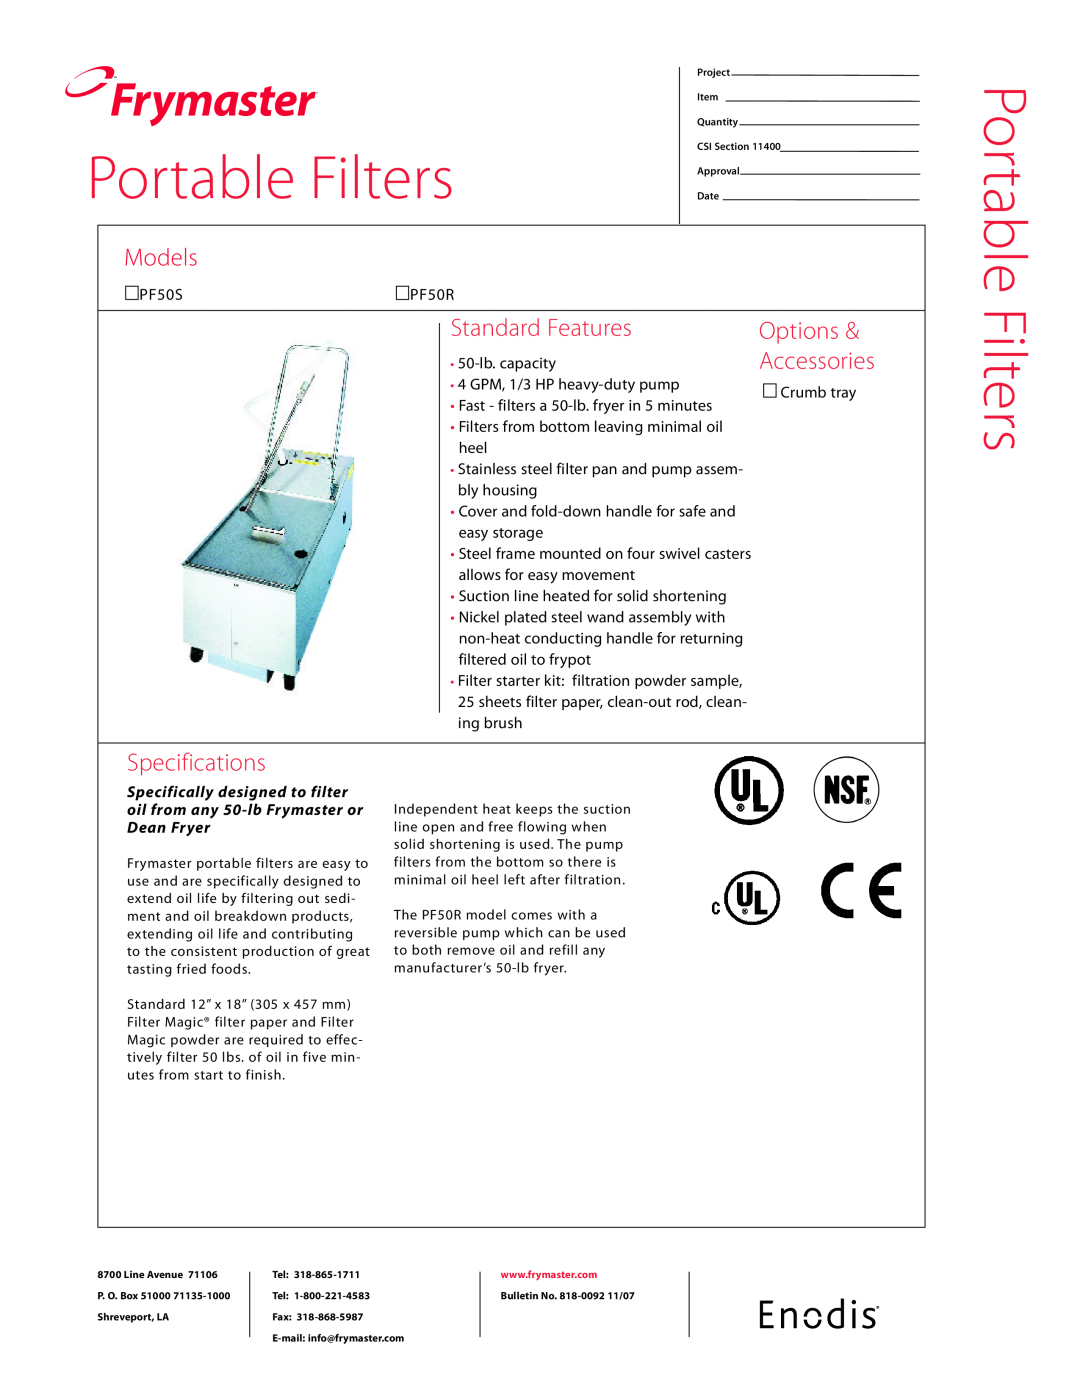 Frymaster PF50R specifications Portable Filters, Frymaster, Models, Standard Features, Options, Accessories, Dean Fryer 